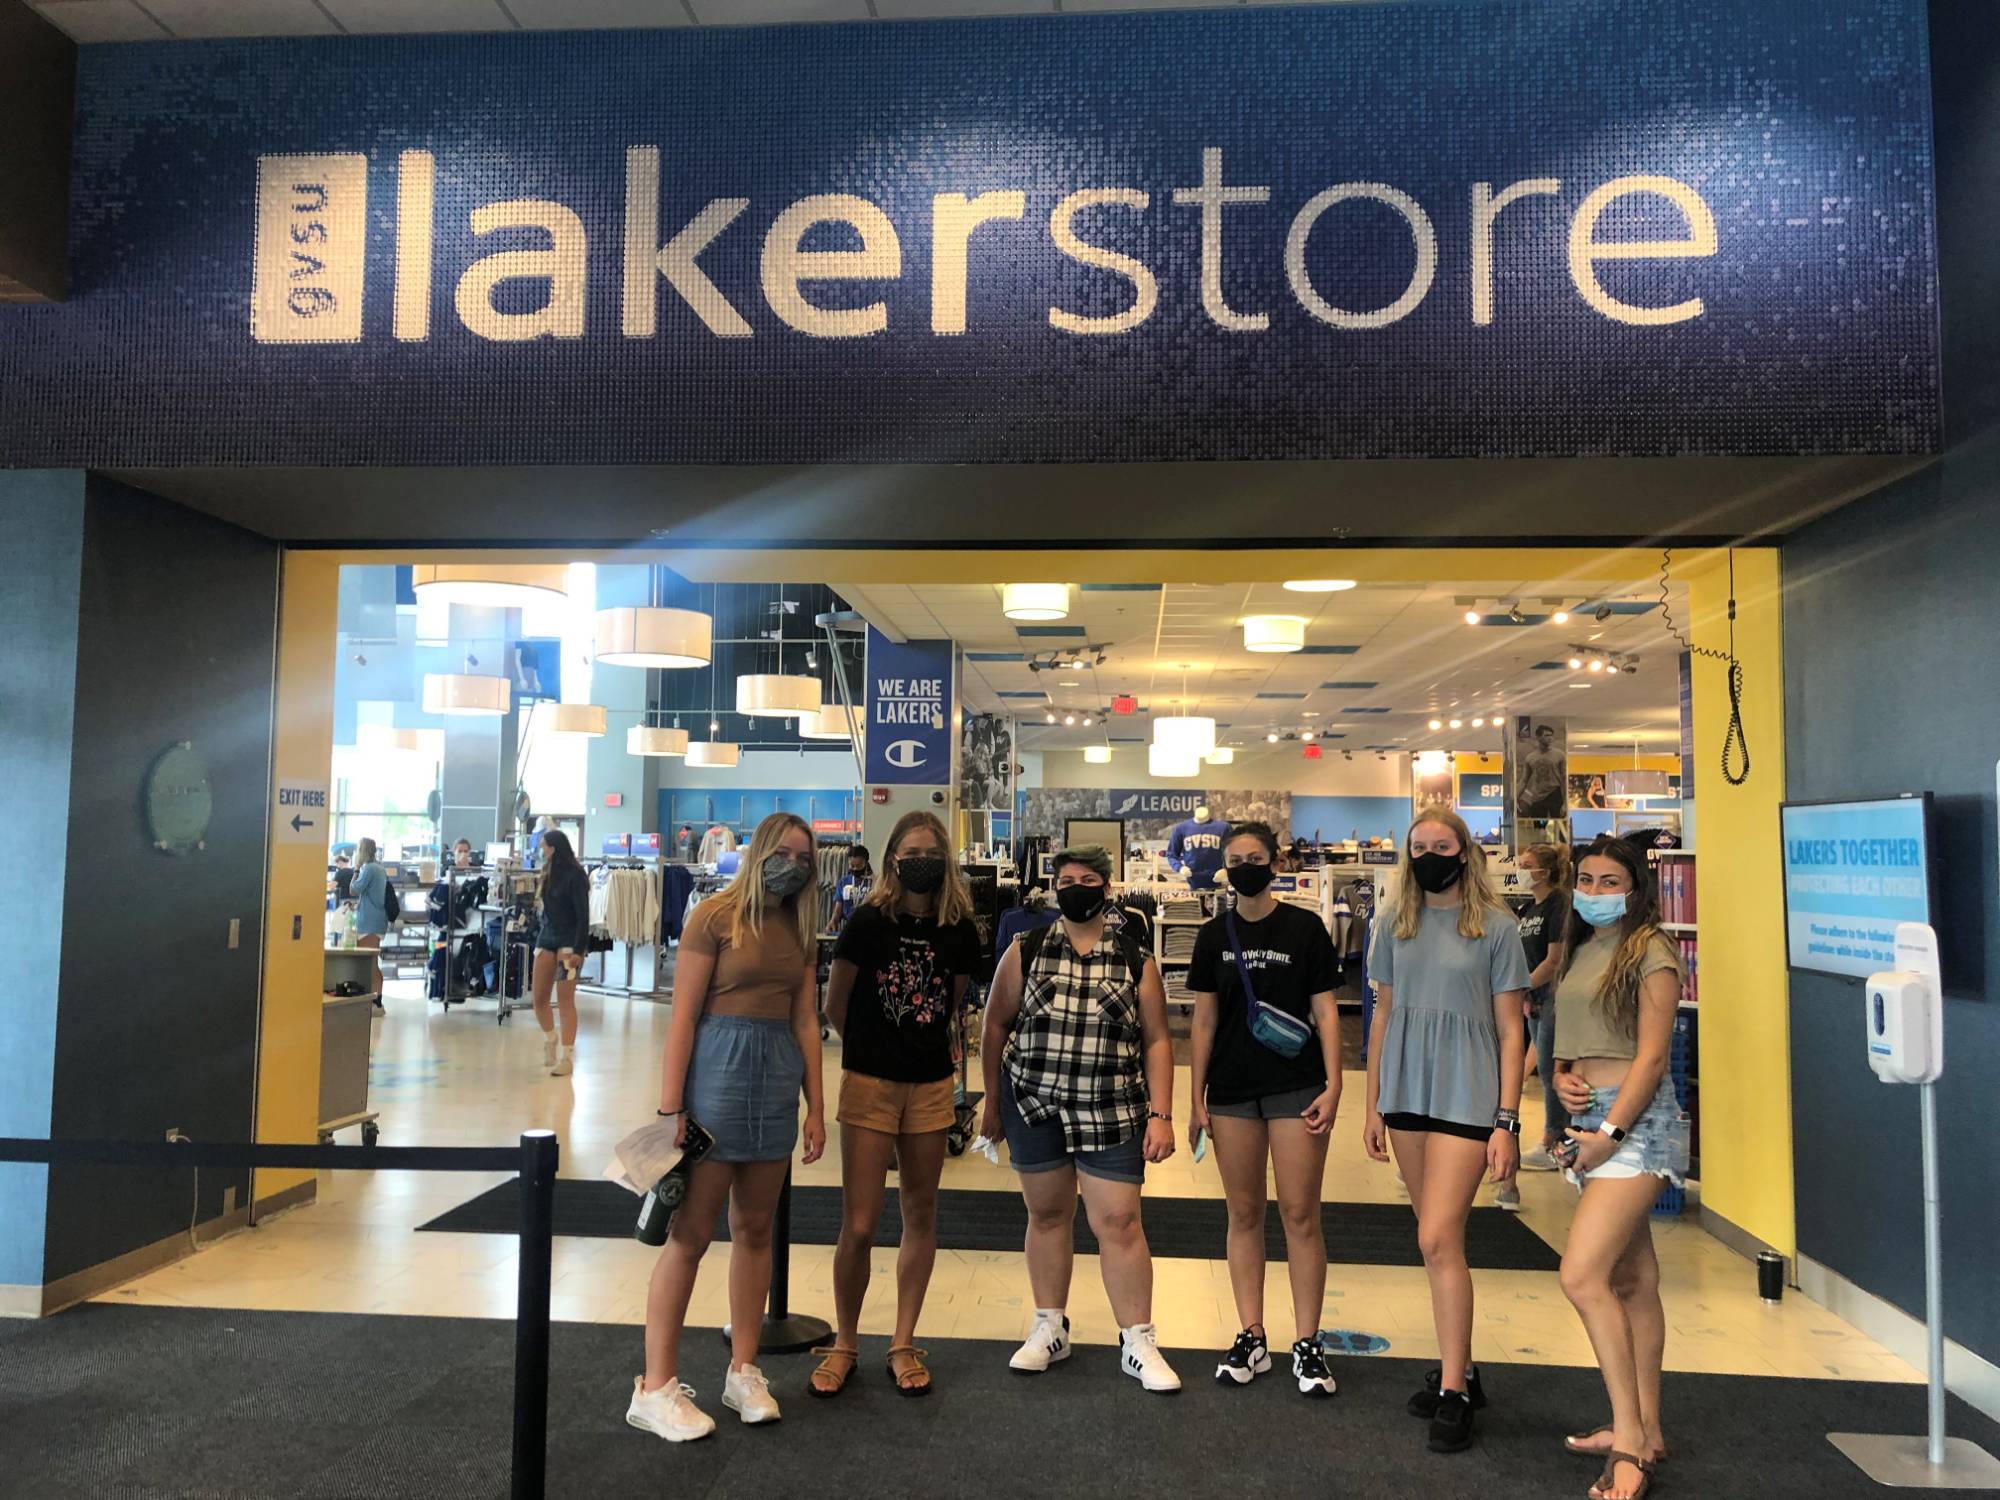 Students standing in front of the LakerStore